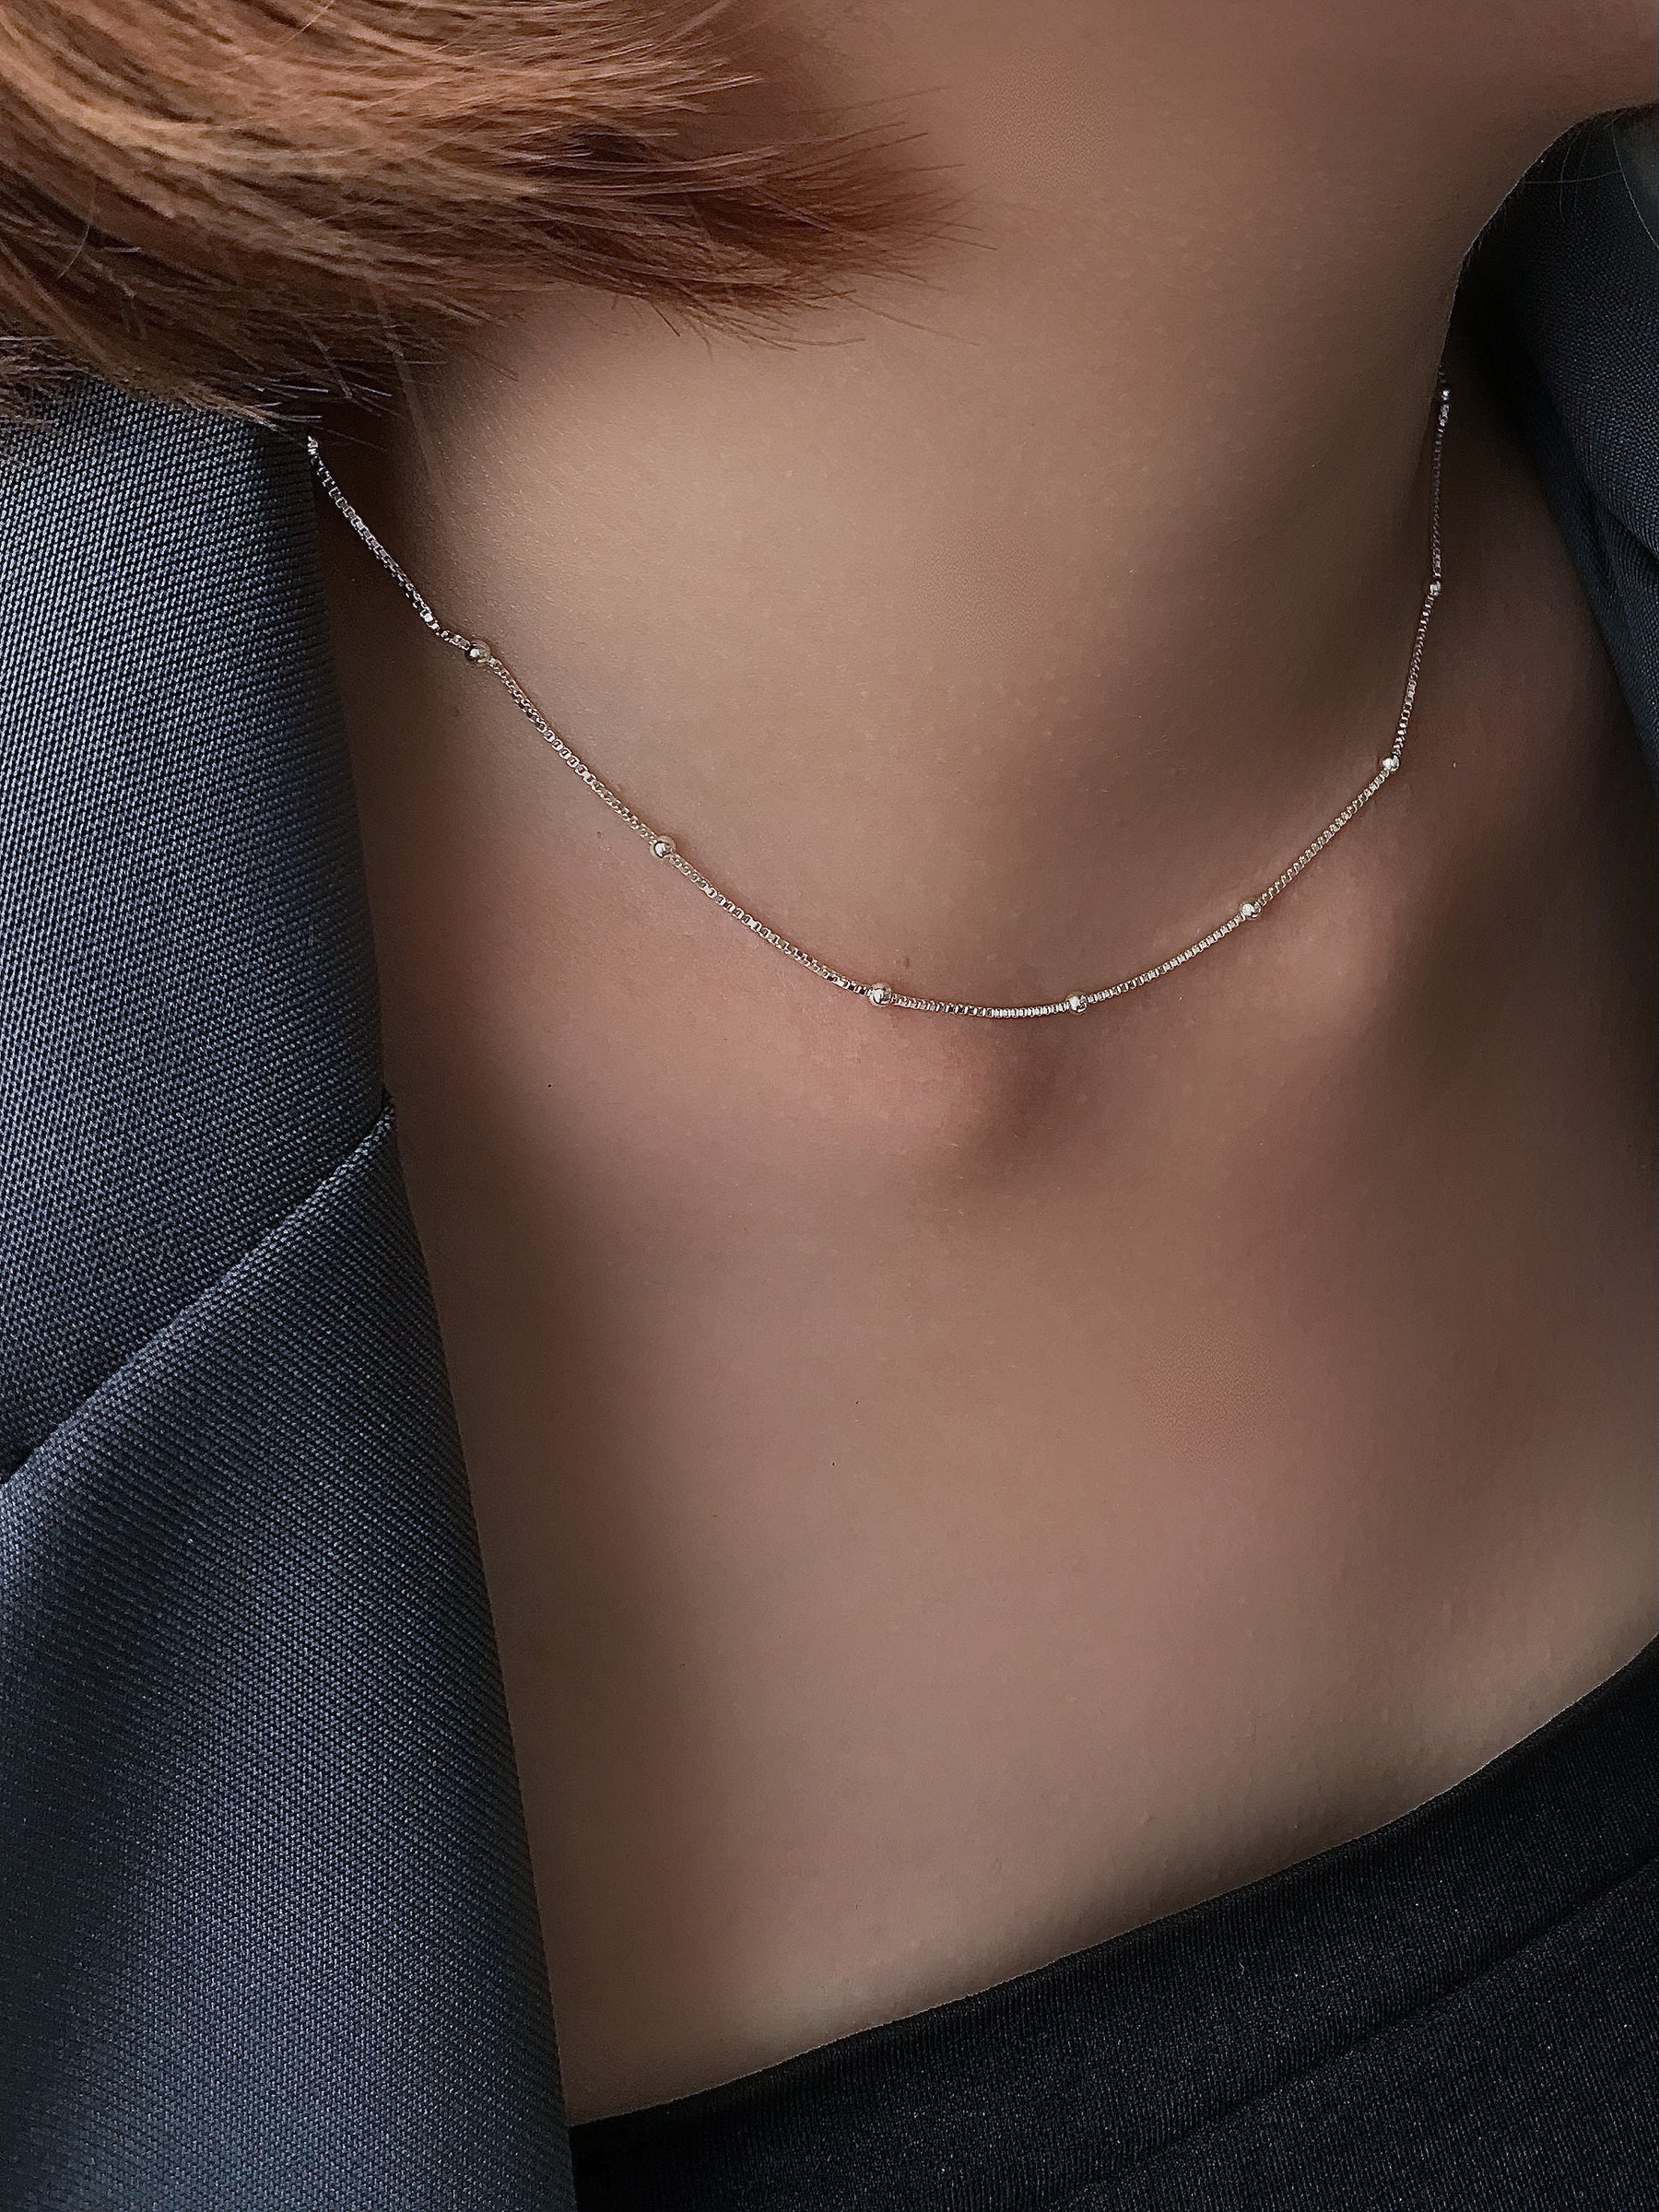 Dainty Omega Chain Necklace